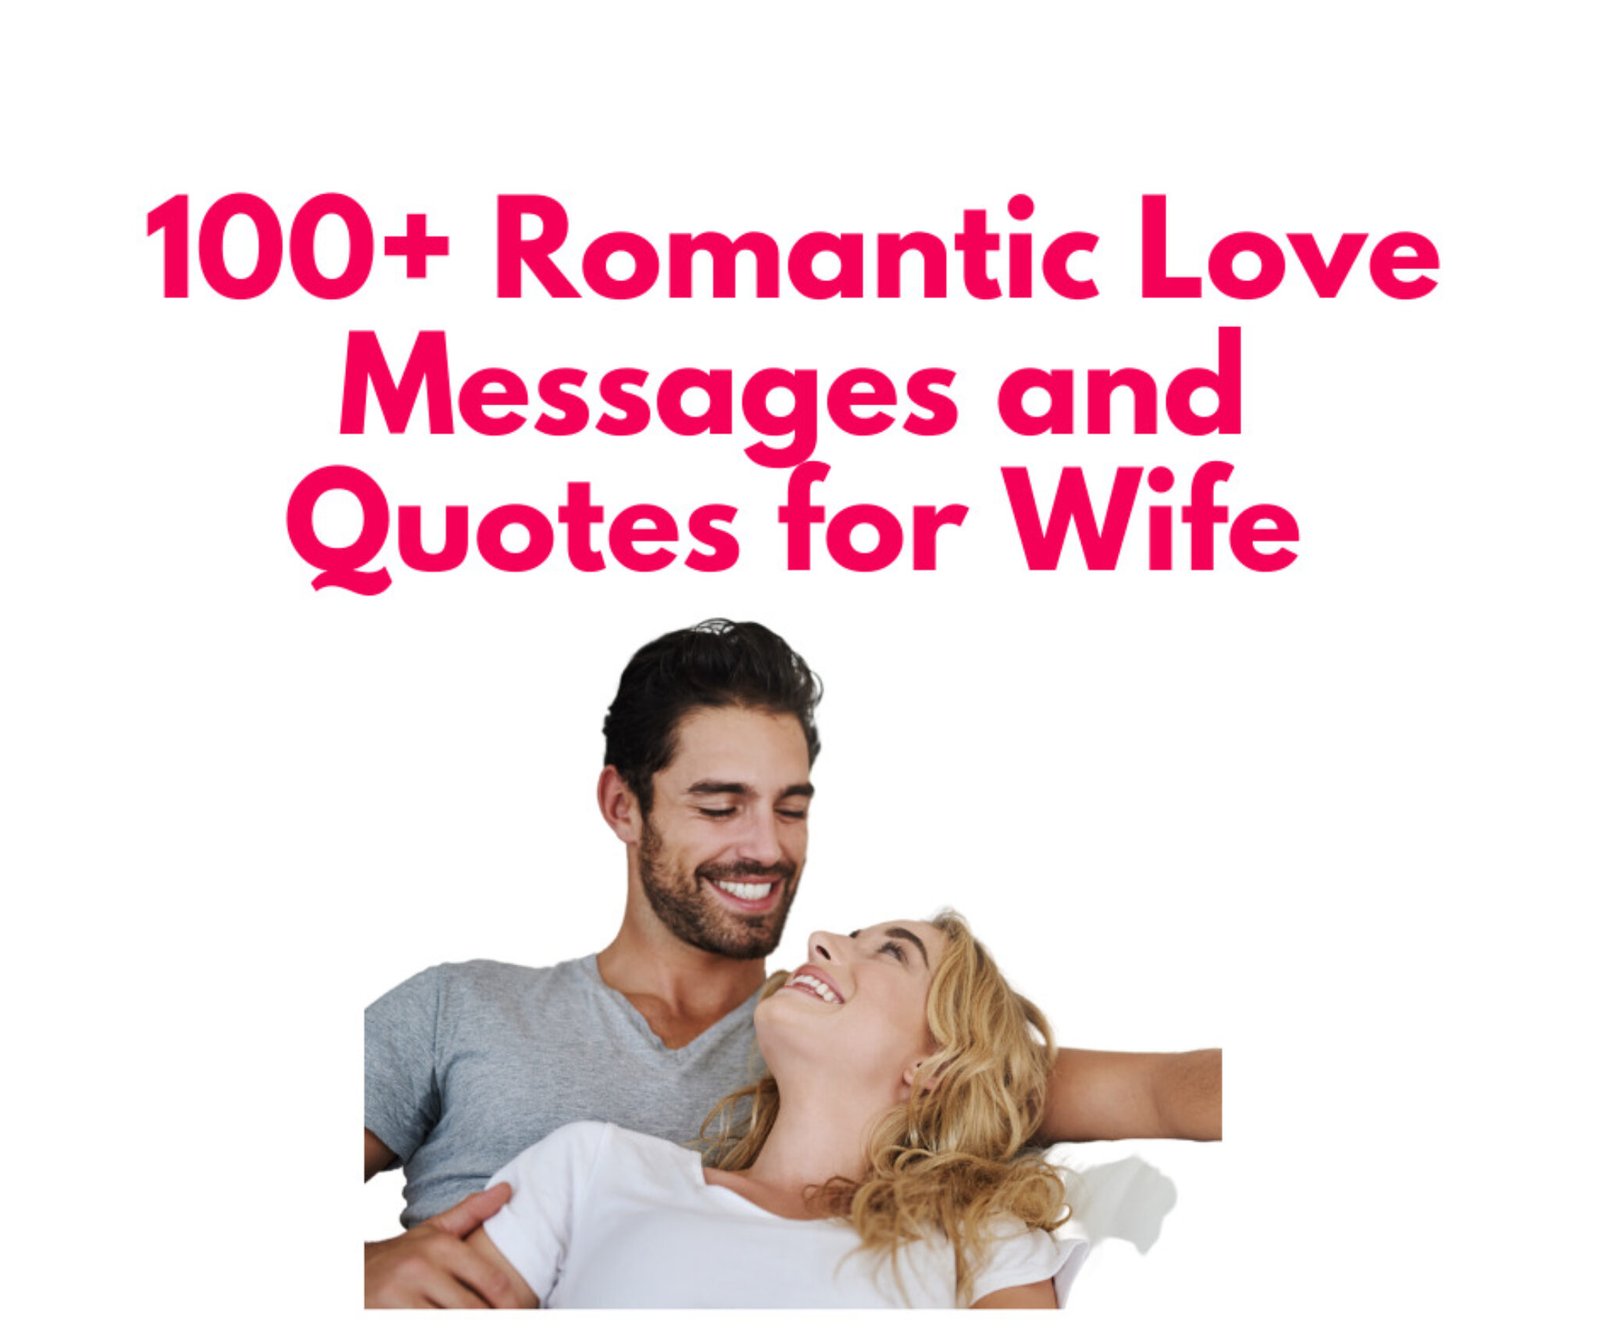 100+ Romantic Love Messages and Quotes for Wife - Sharing Our Experiences